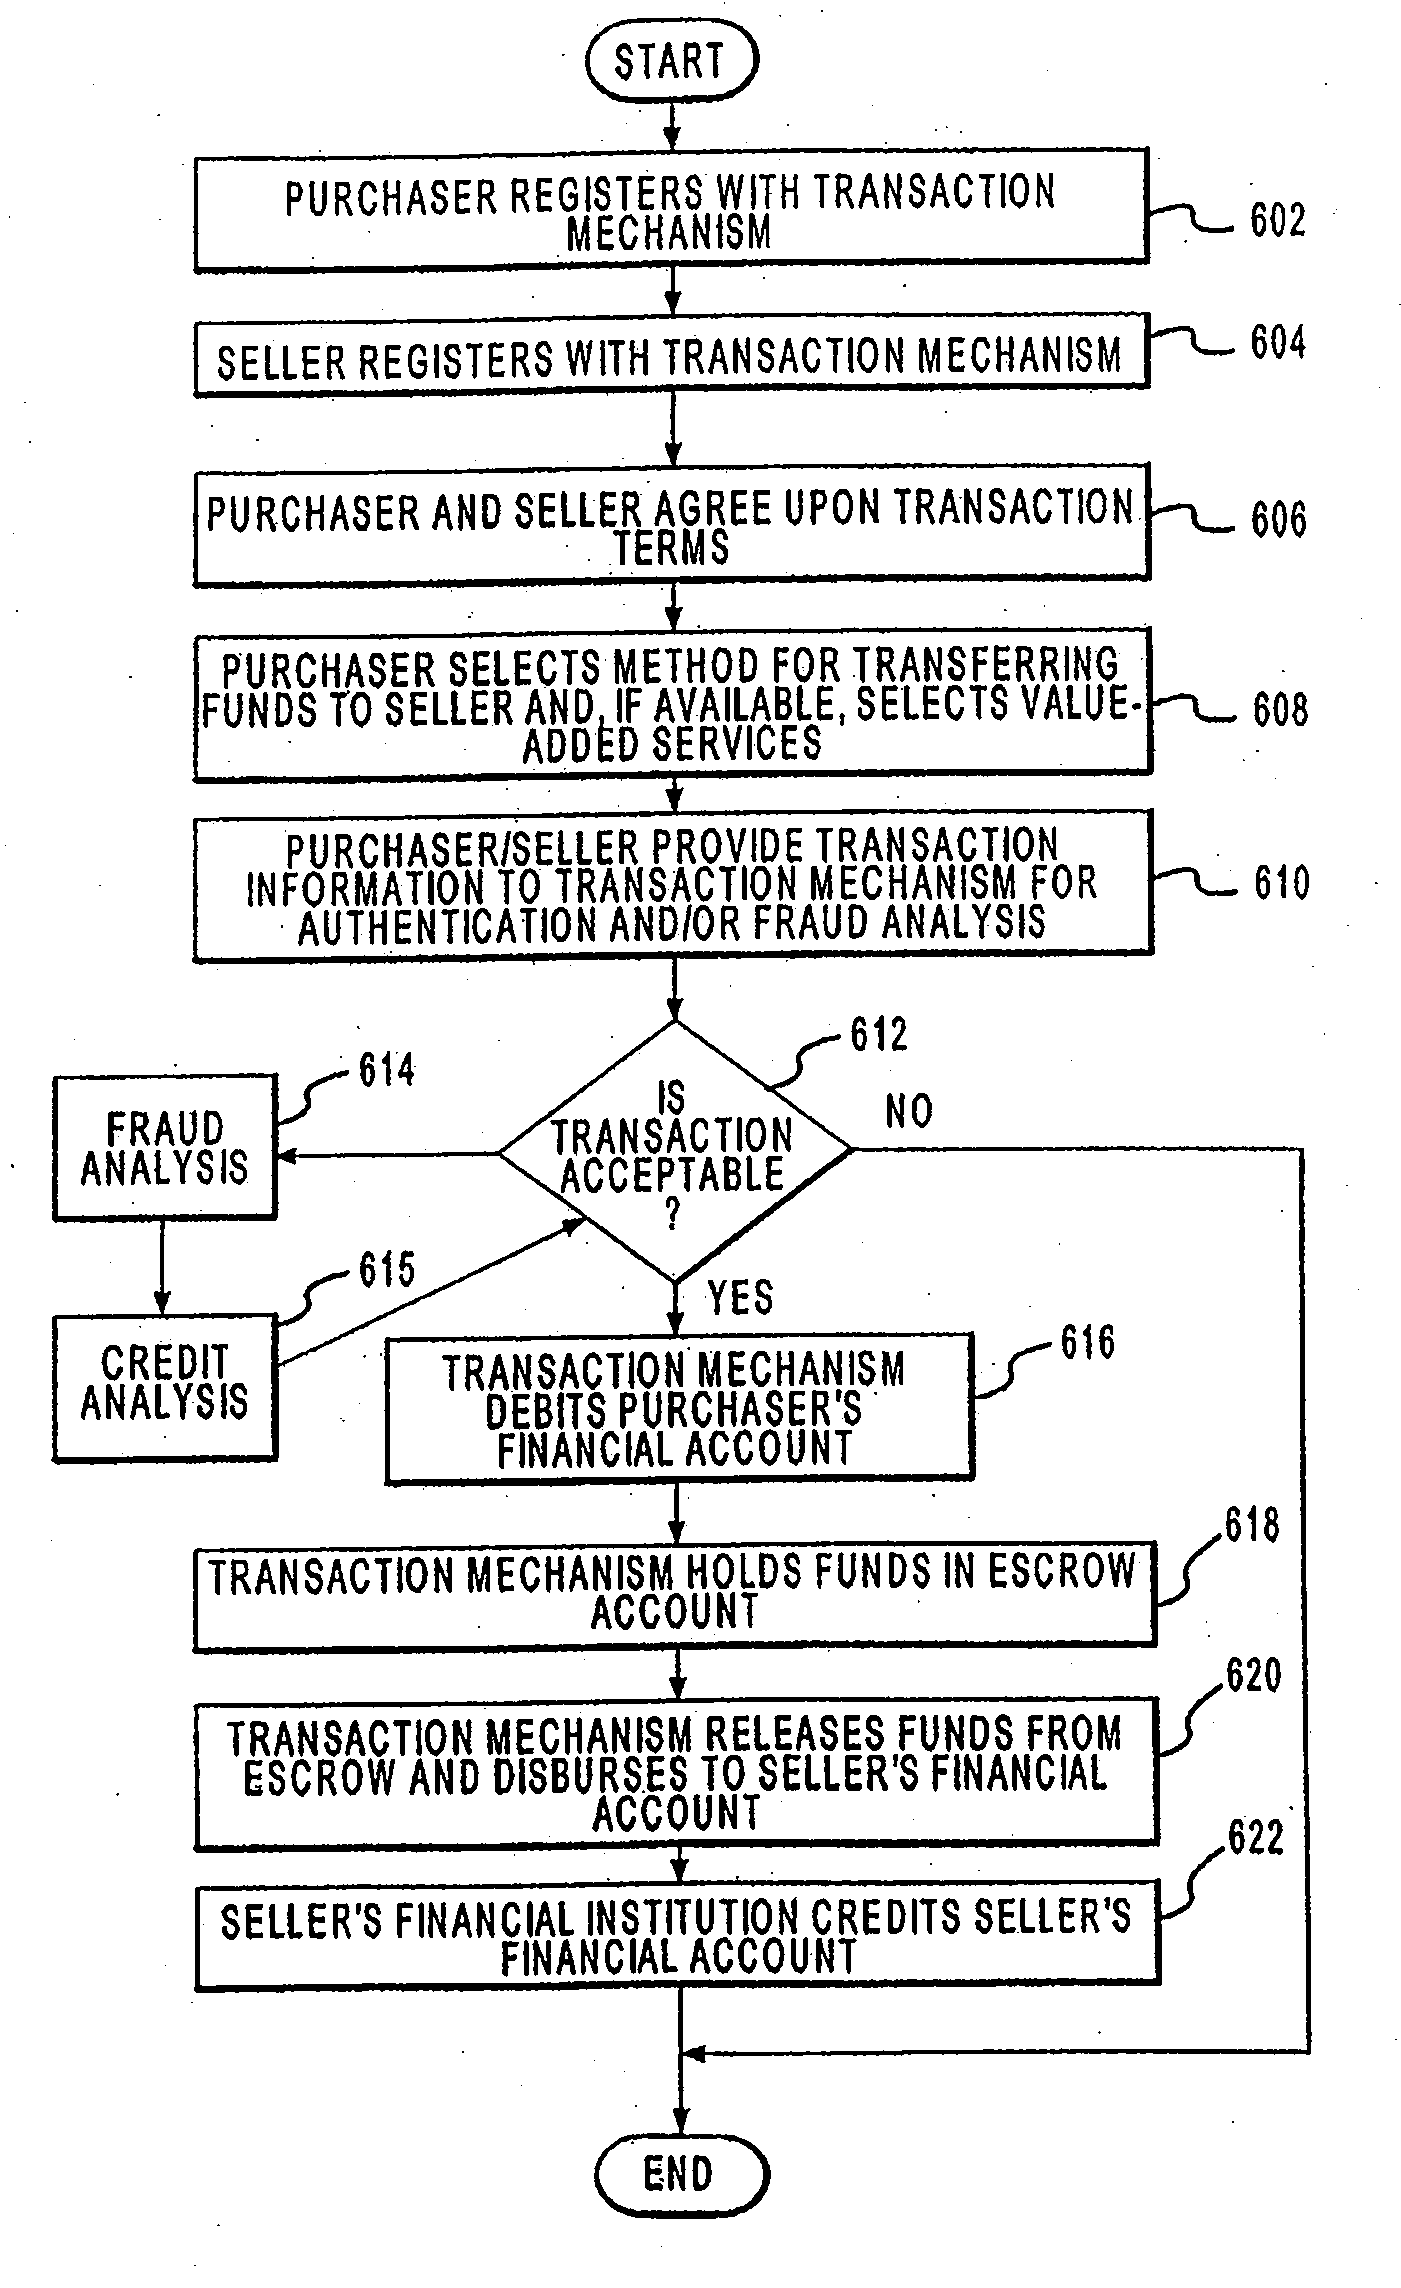 Methods for Processing a Payment Authorization Request Utilizing a Network of Point of Sale Devices